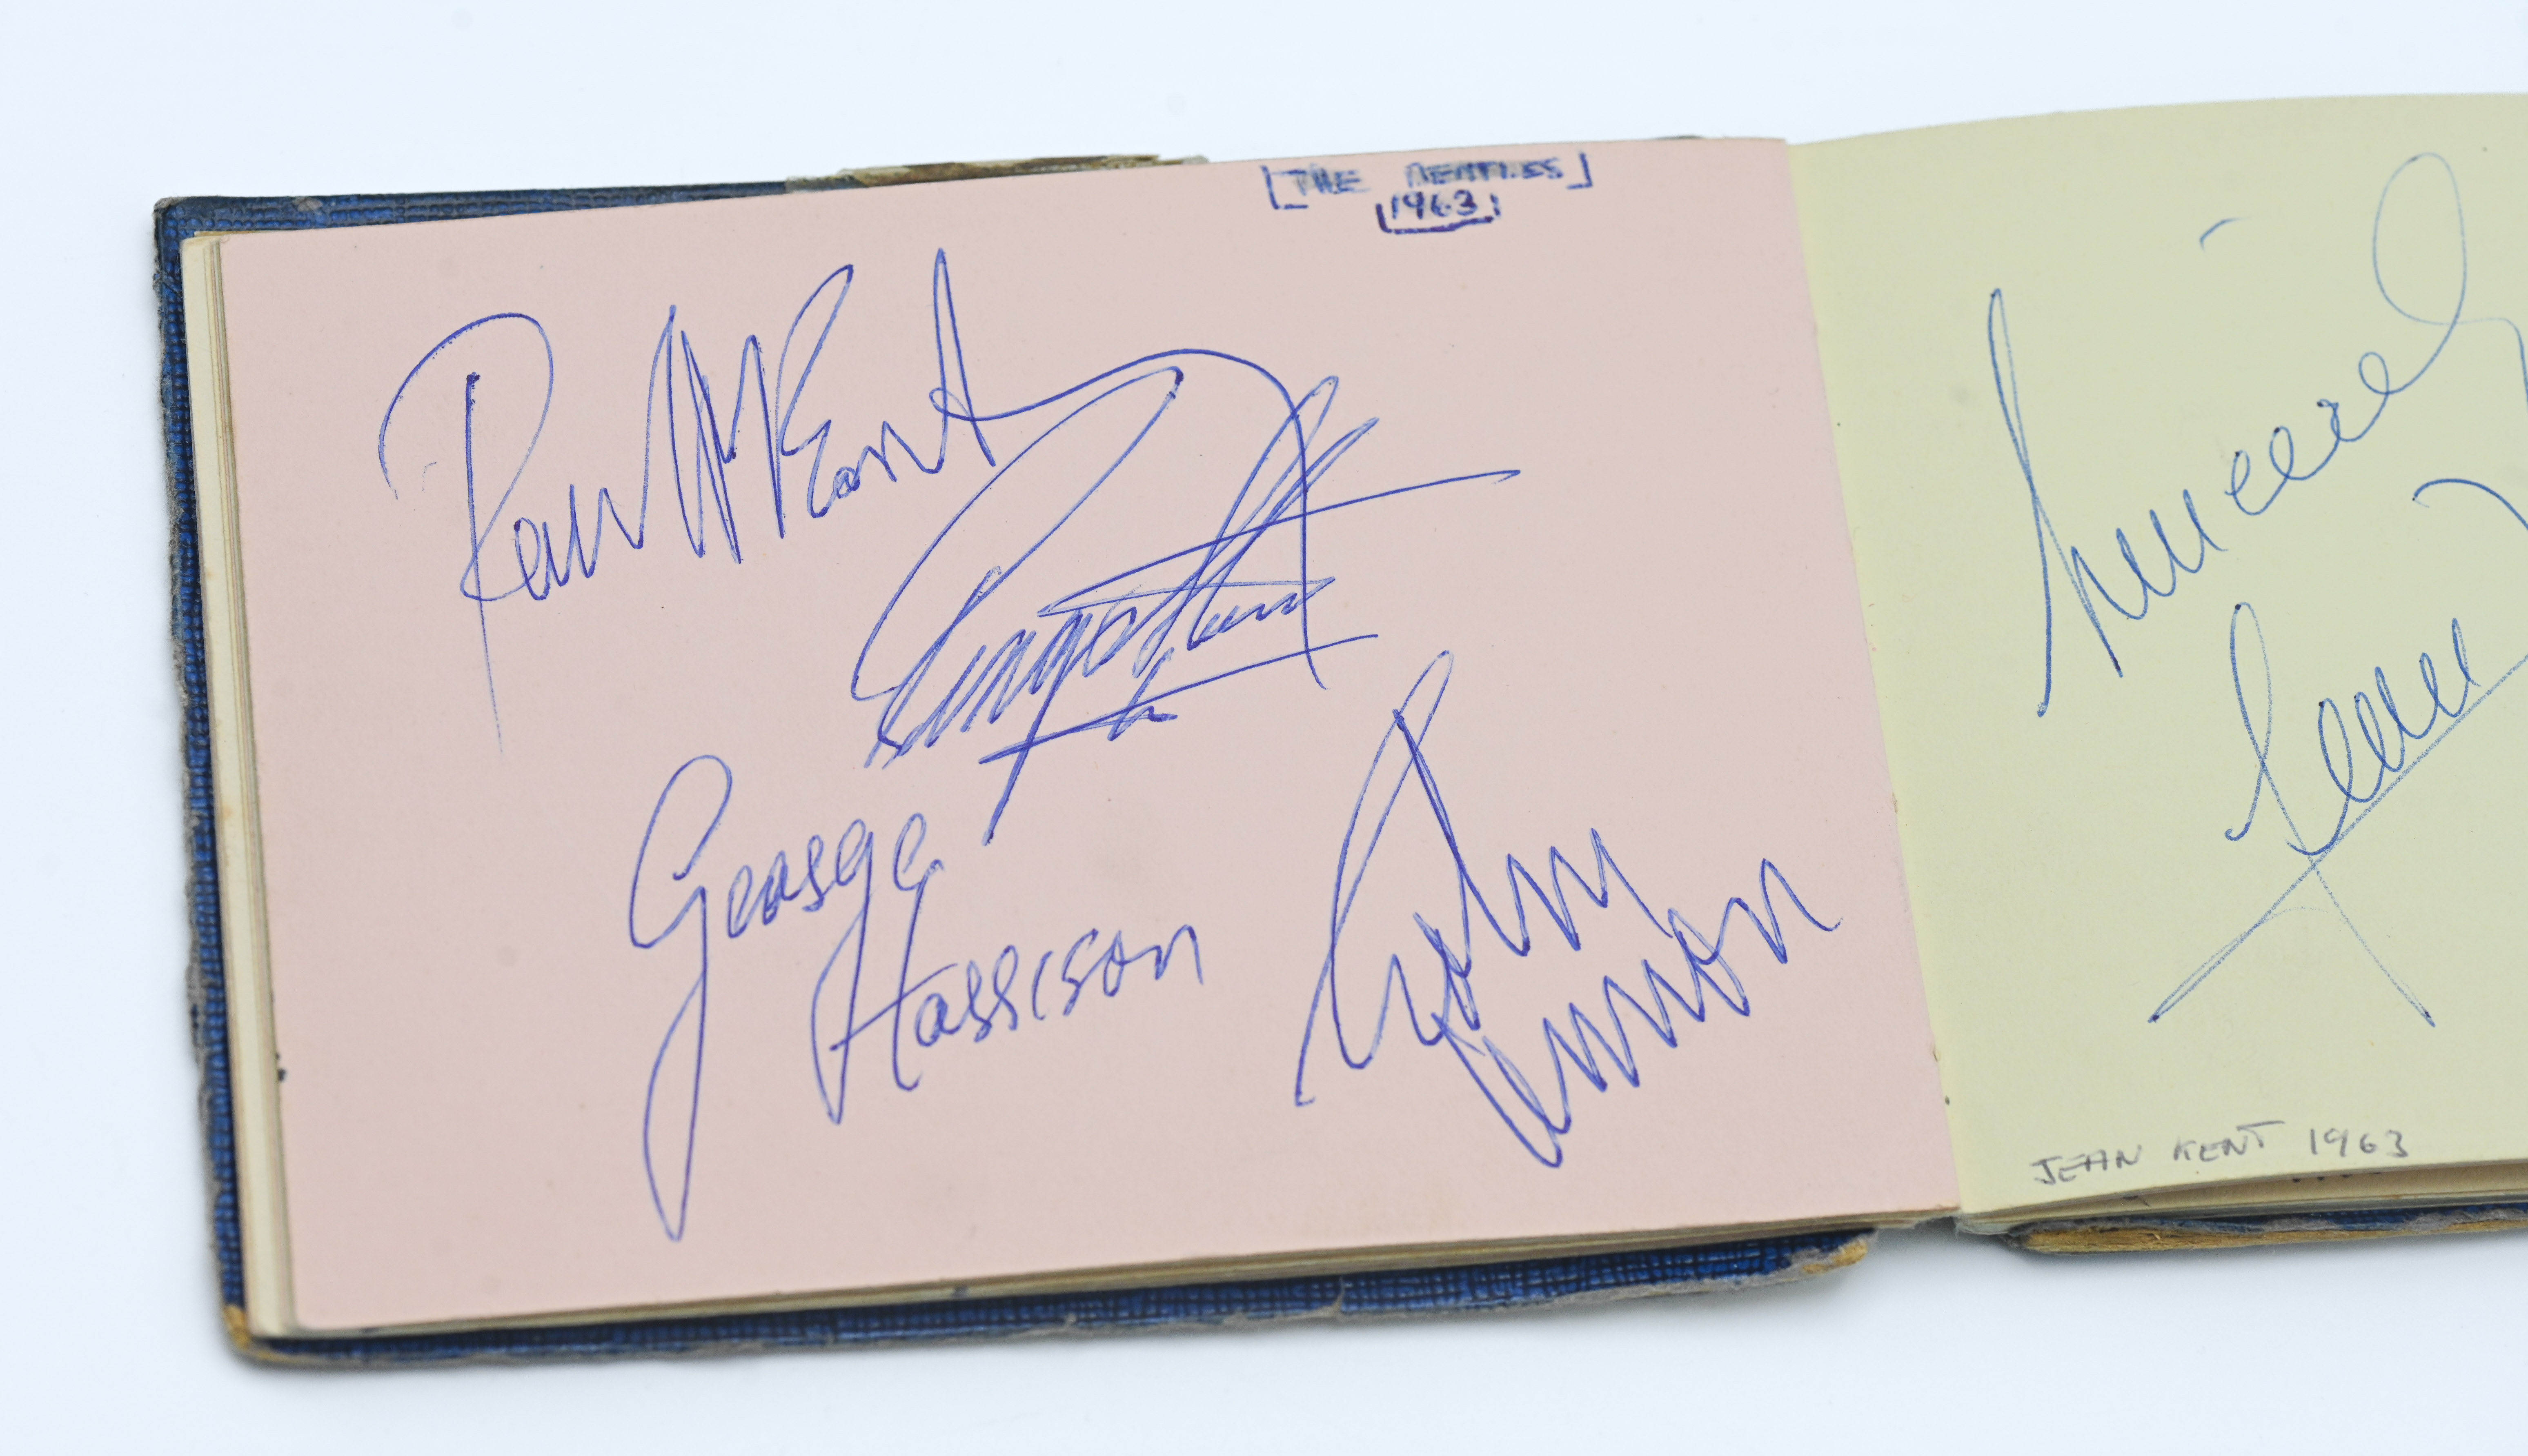 A 1960's autograph album containing autographs of various celebrities including Cliff Richard, - Image 3 of 37